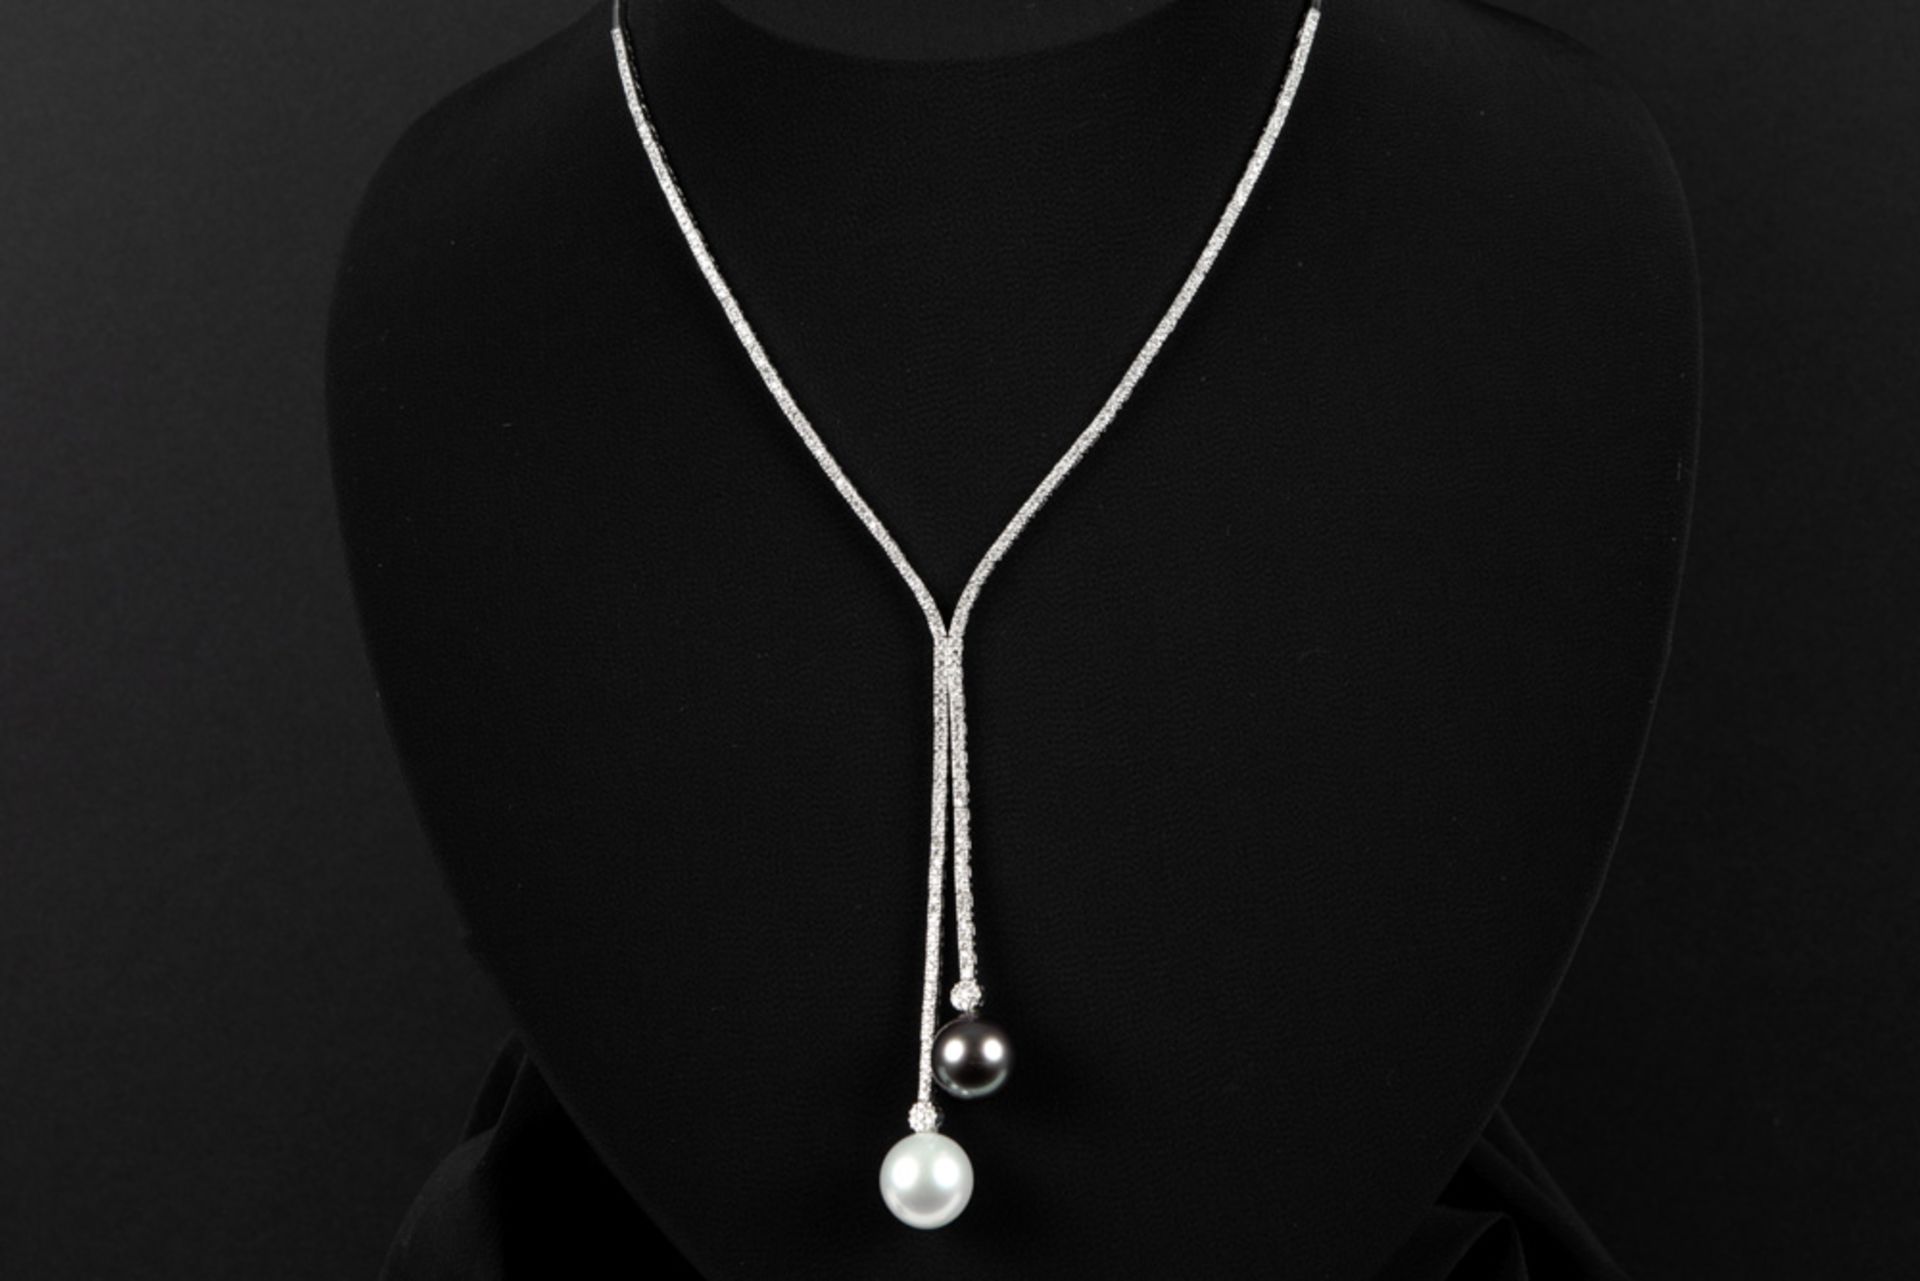 very elegant necklace in white gold (18 carat) with ca 1,50 carat of high quality brilliant cut